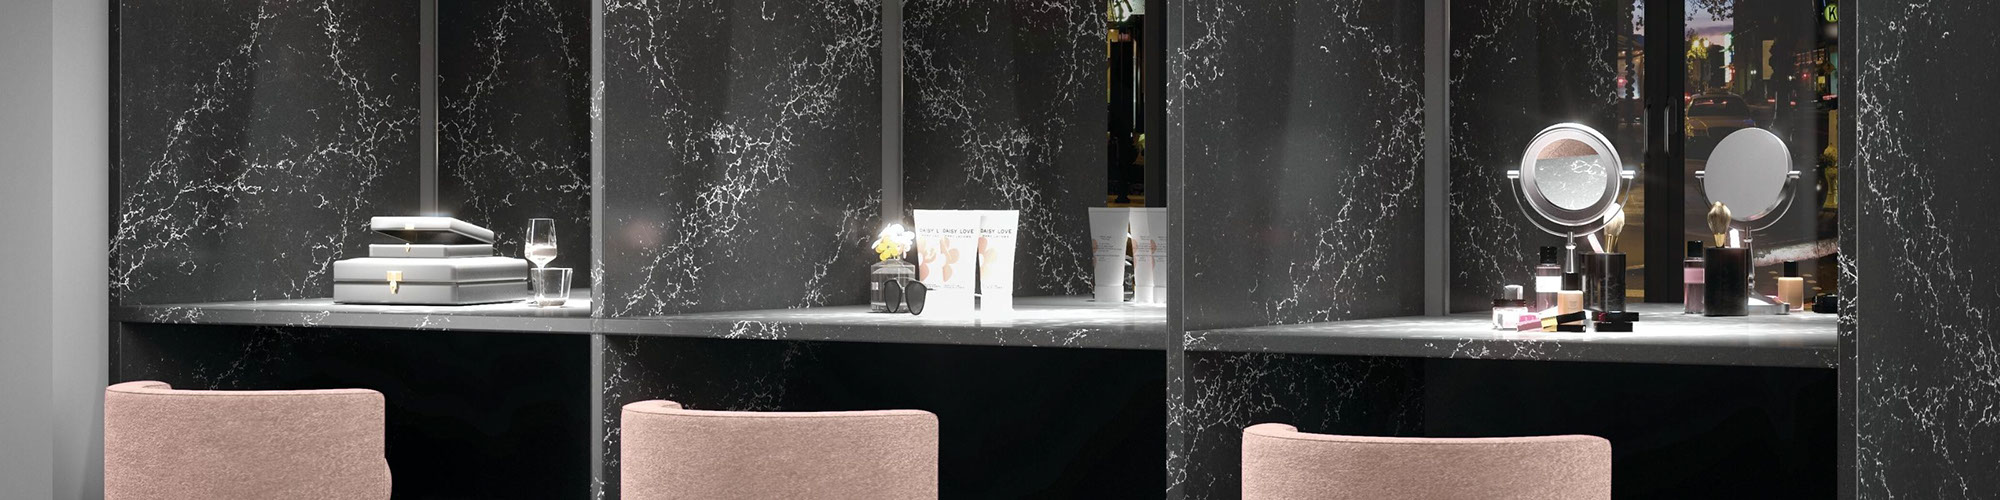 Dressing room with pink vanity stools in front of makeup mirrors divided by black & white quartz walls that look like marble.